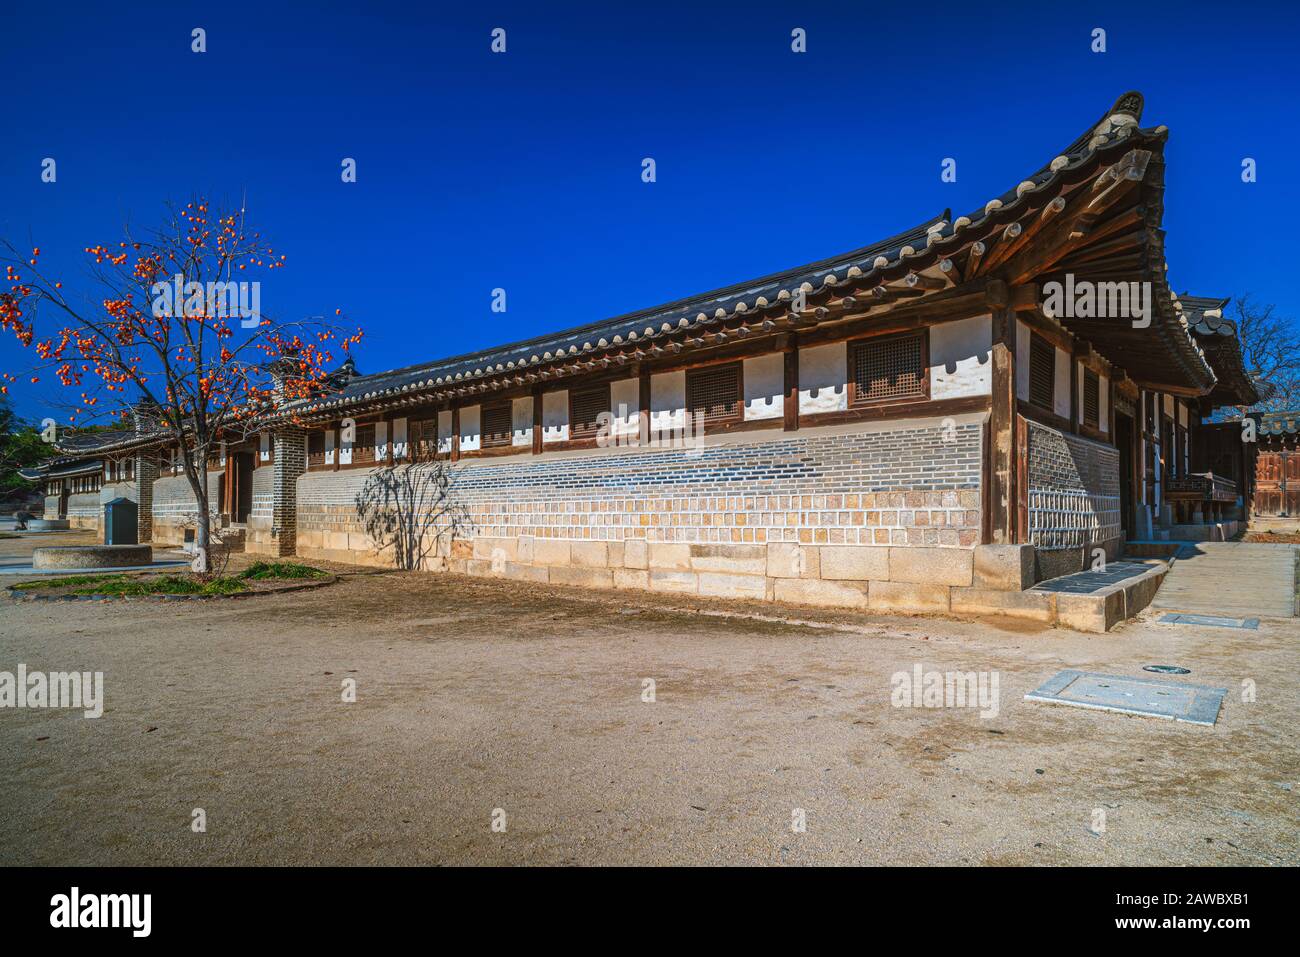 Changdeokgung Palace in Seoul, South Korea with its secret garden is spectacular in autumn. Stock Photo